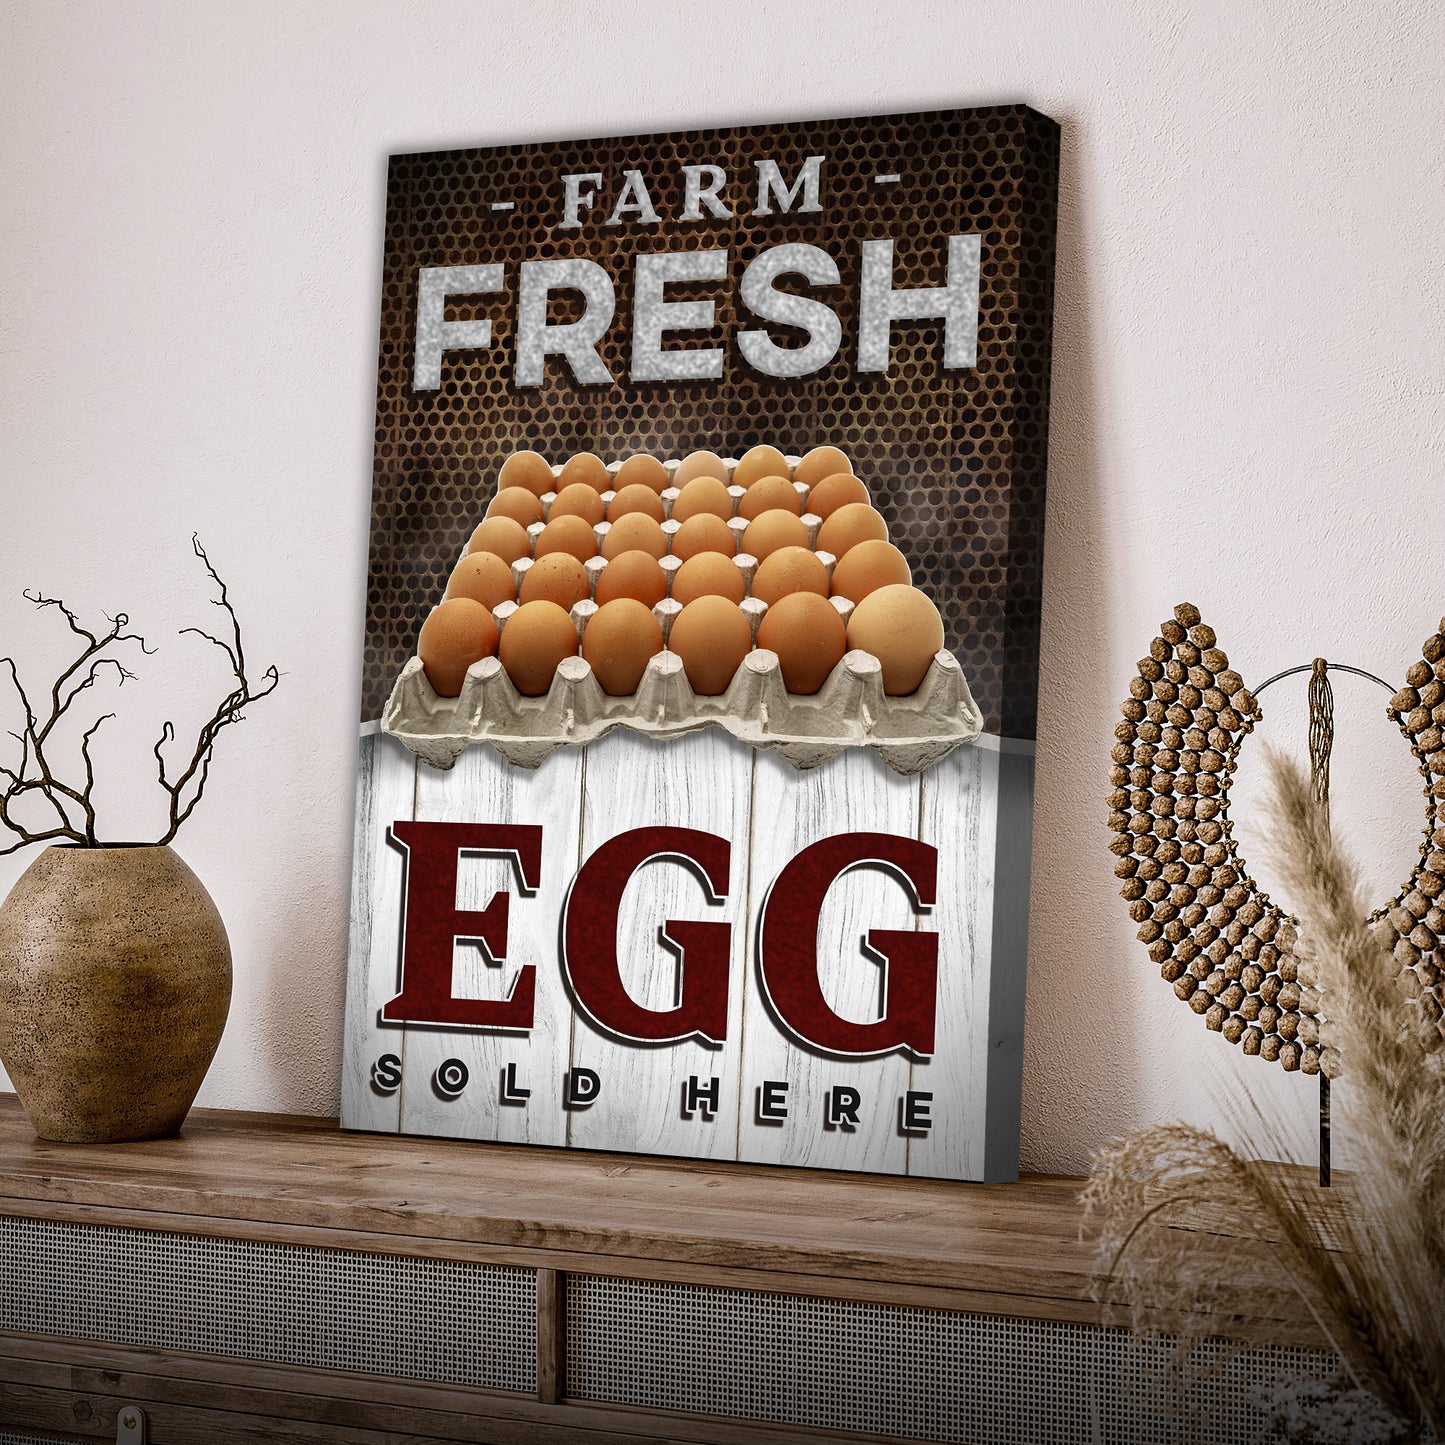 Sold Here Farm Fresh Eggs Sign  - Image by Tailored Canvases